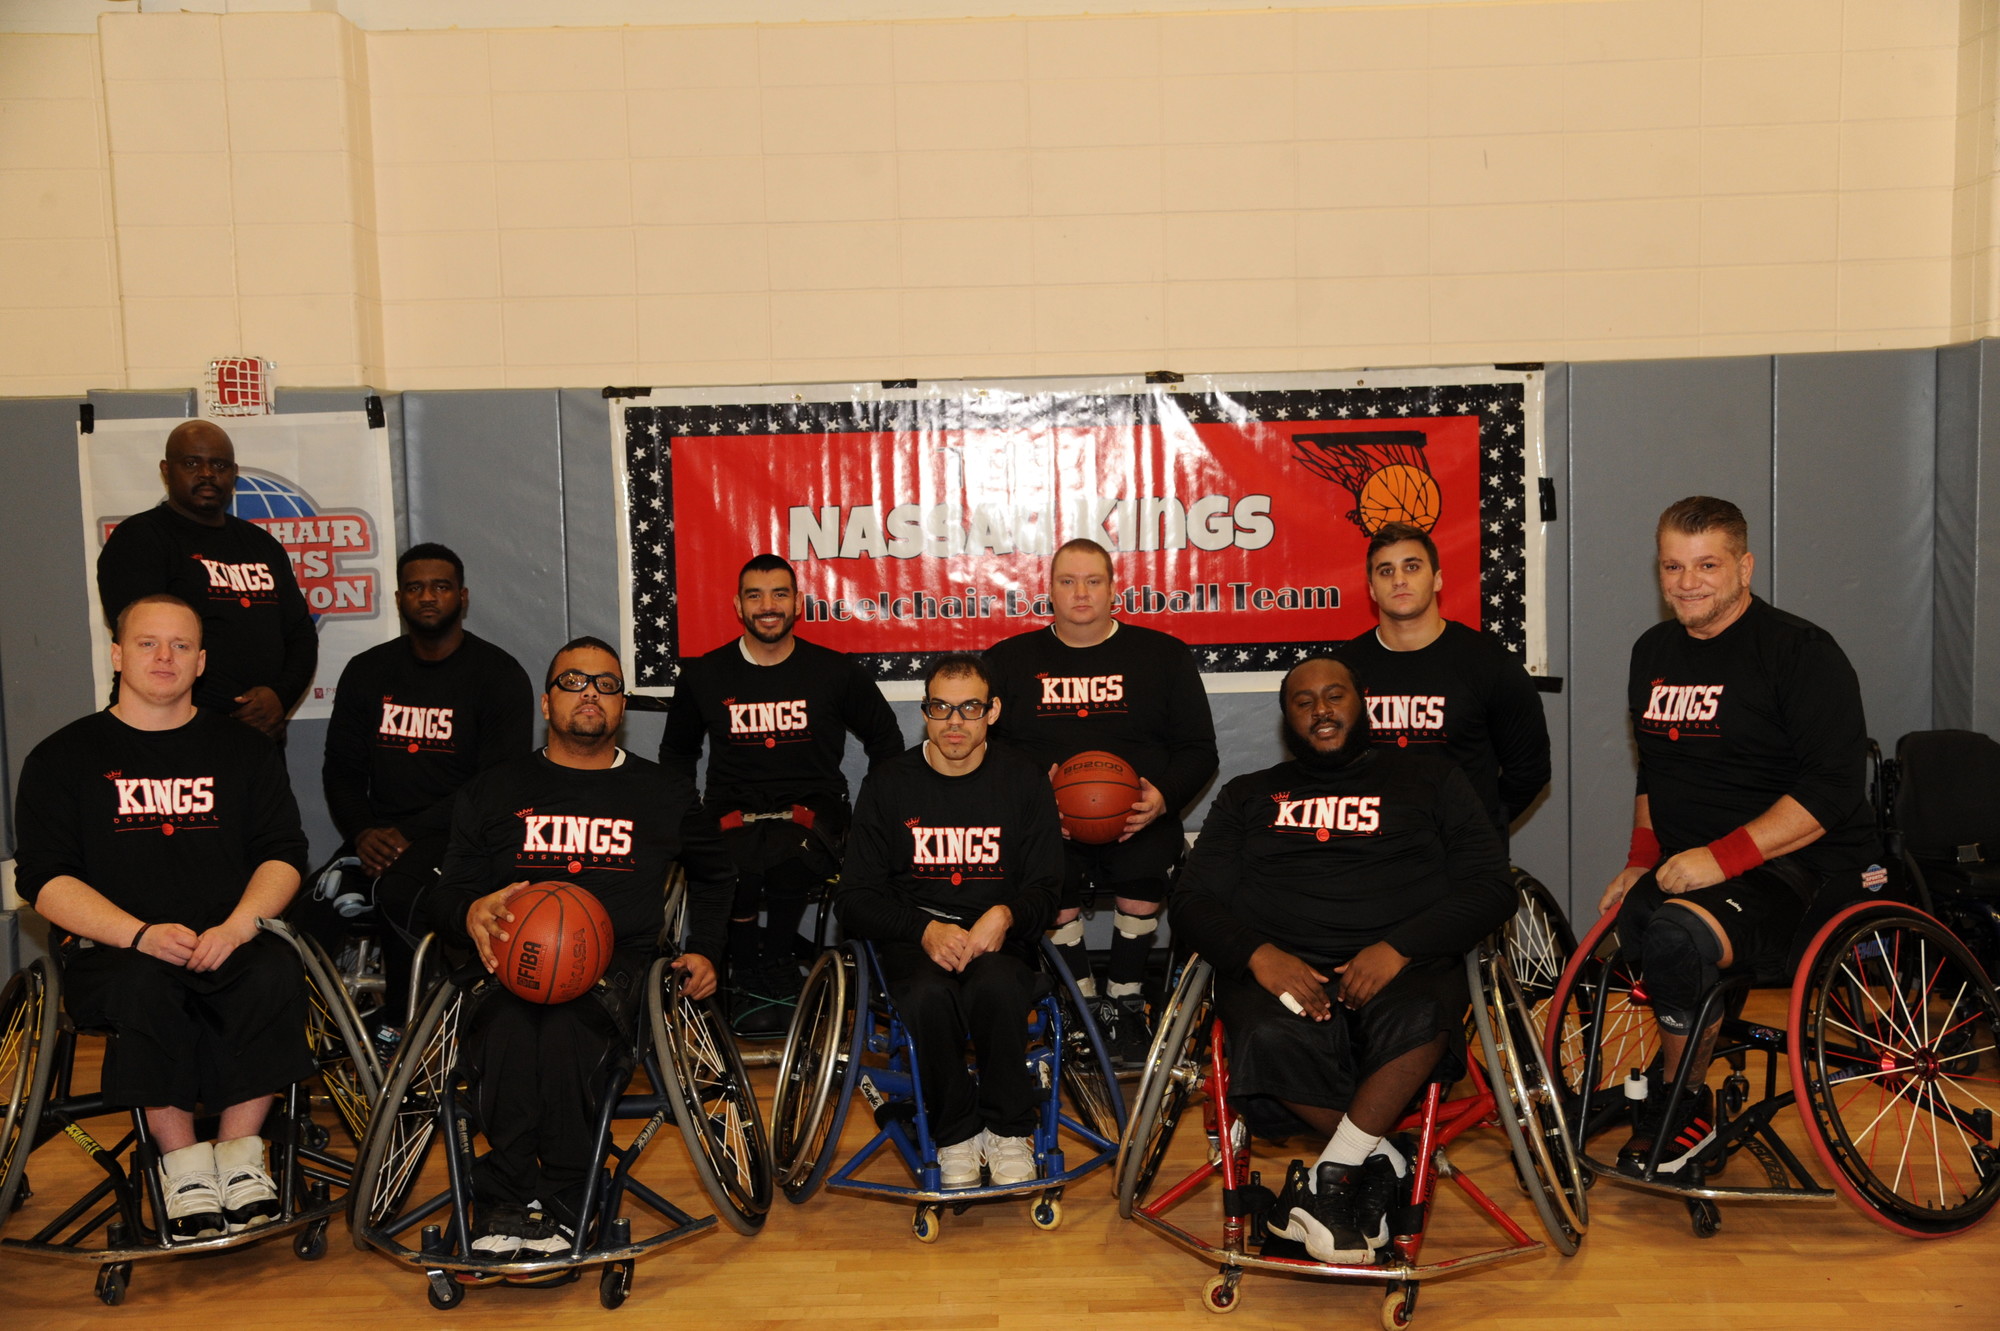 The Nassau Kings are one 187 teams trying to qualify for nationals in April for Division III of the National Wheelchair Basketball Association.